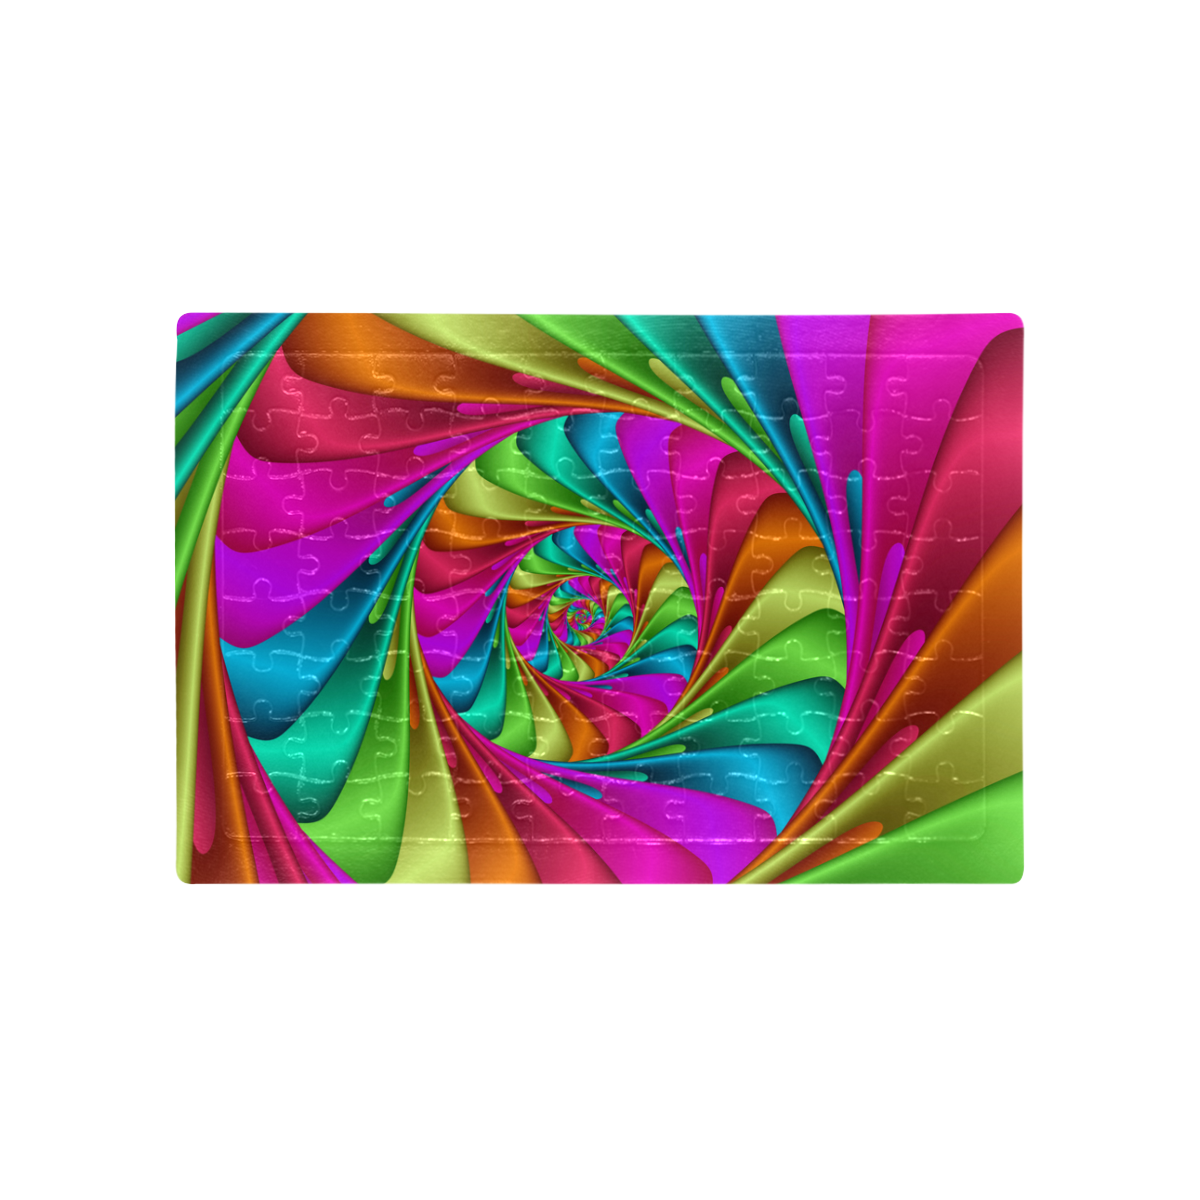 Psychedelic Rainbow Spiral Puzzle A4 Size Jigsaw Puzzle (Set of 80 Pieces)